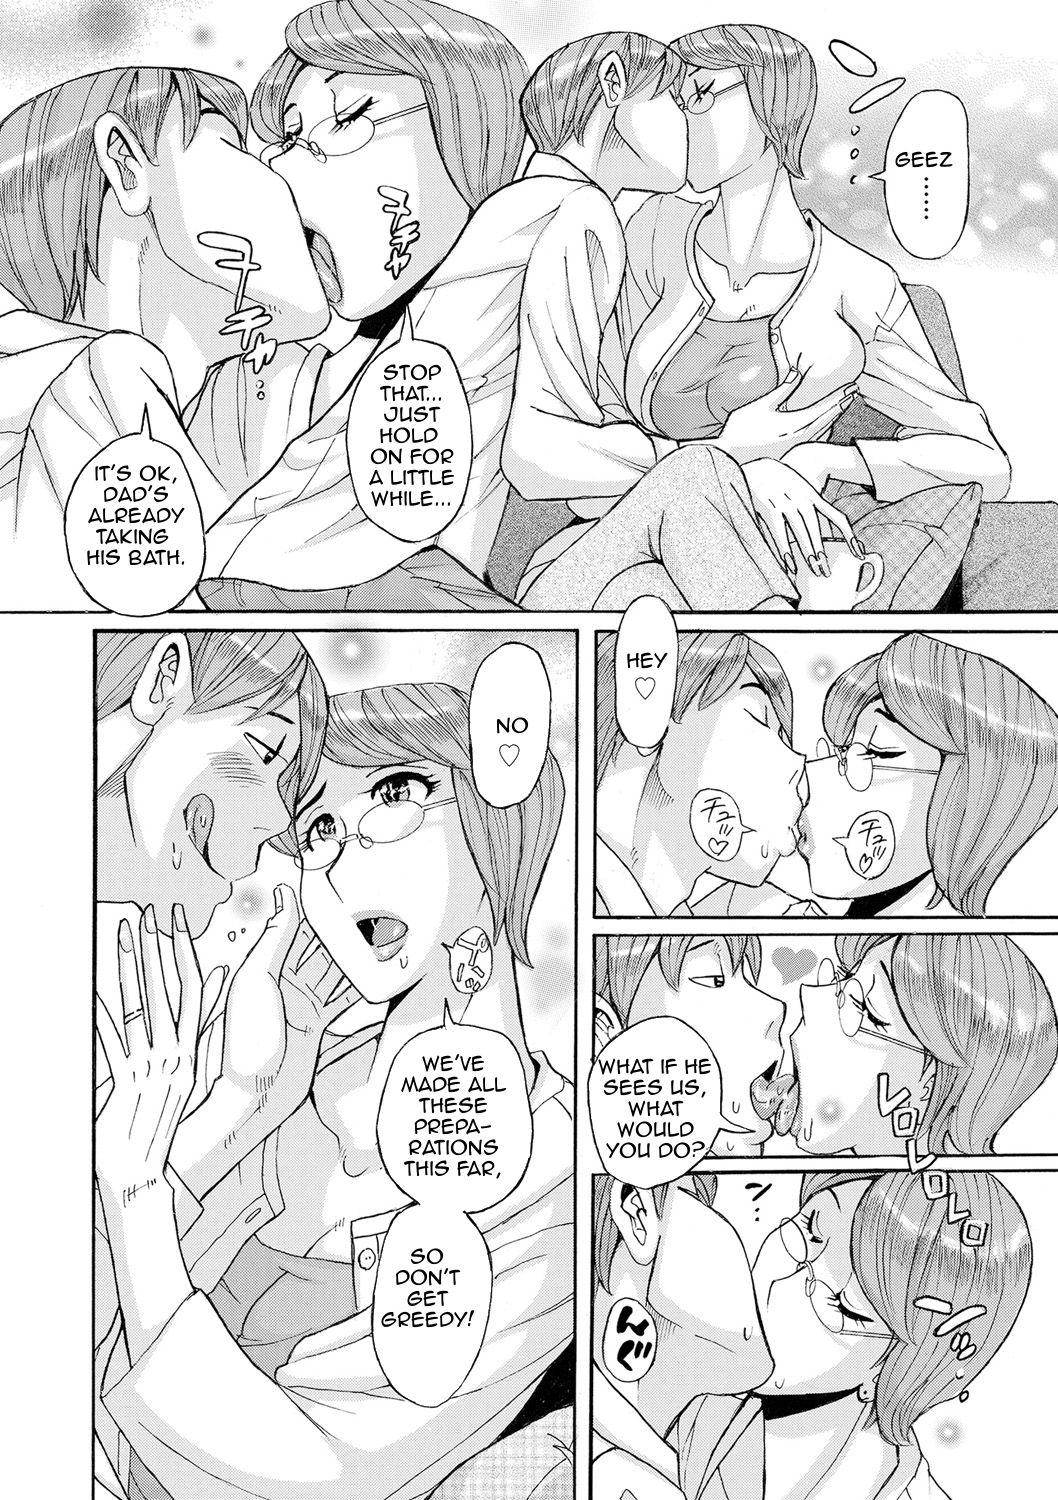 Bus Mother's Care Service 2 Girlsfucking - Page 4